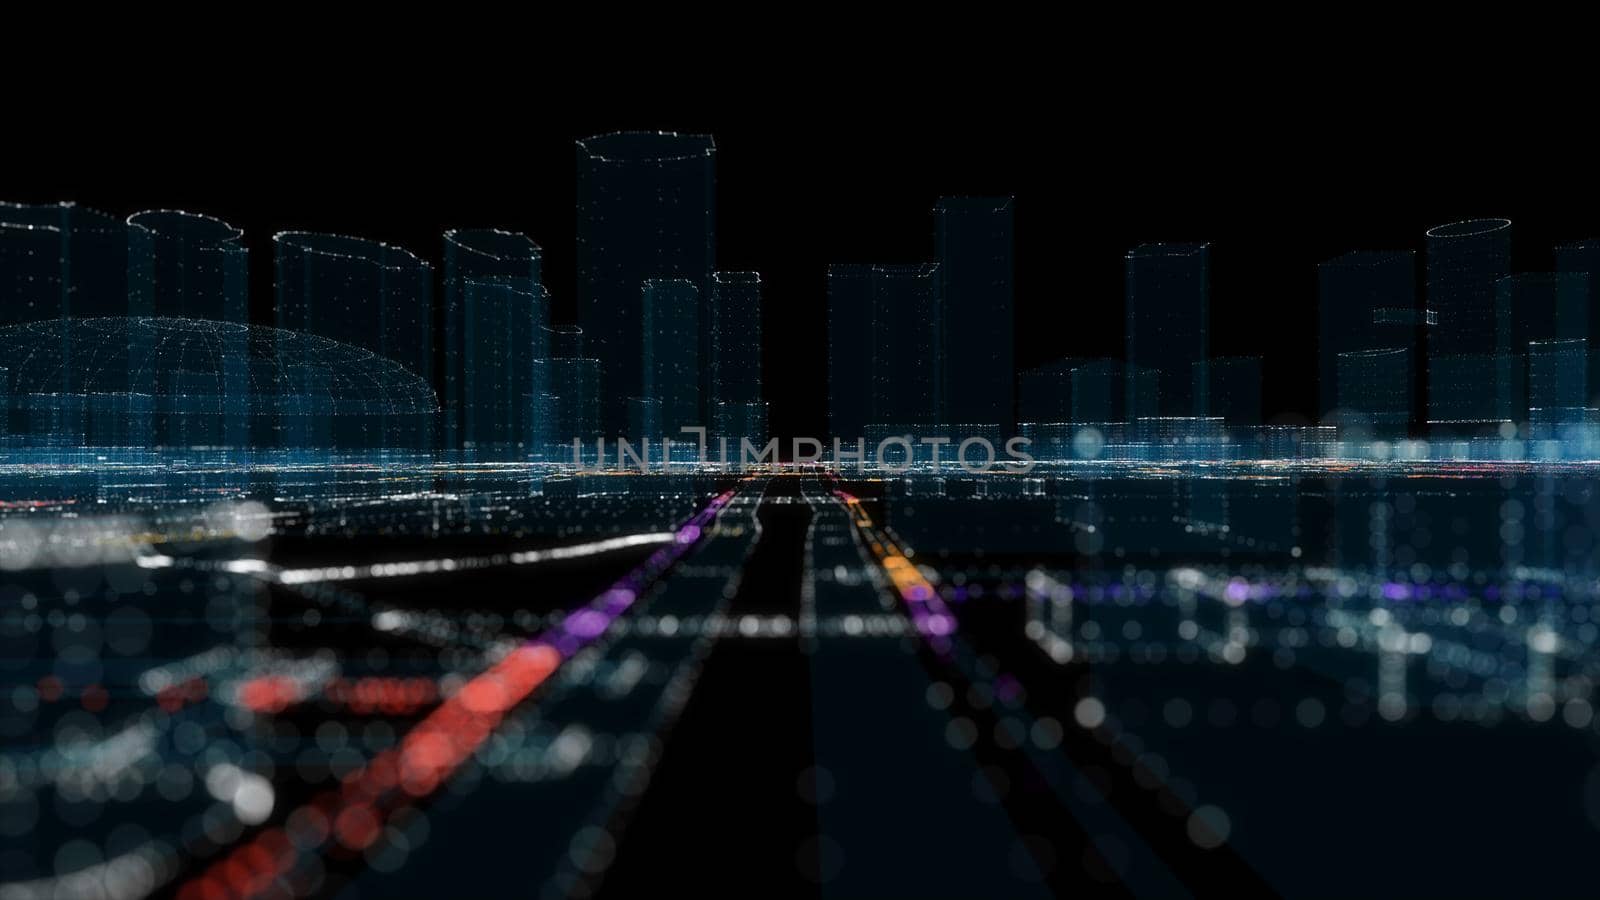 Futuristic Smart Digital City. Buildings and Roads. Smart City And Technology Business Concept. 3D Illustration